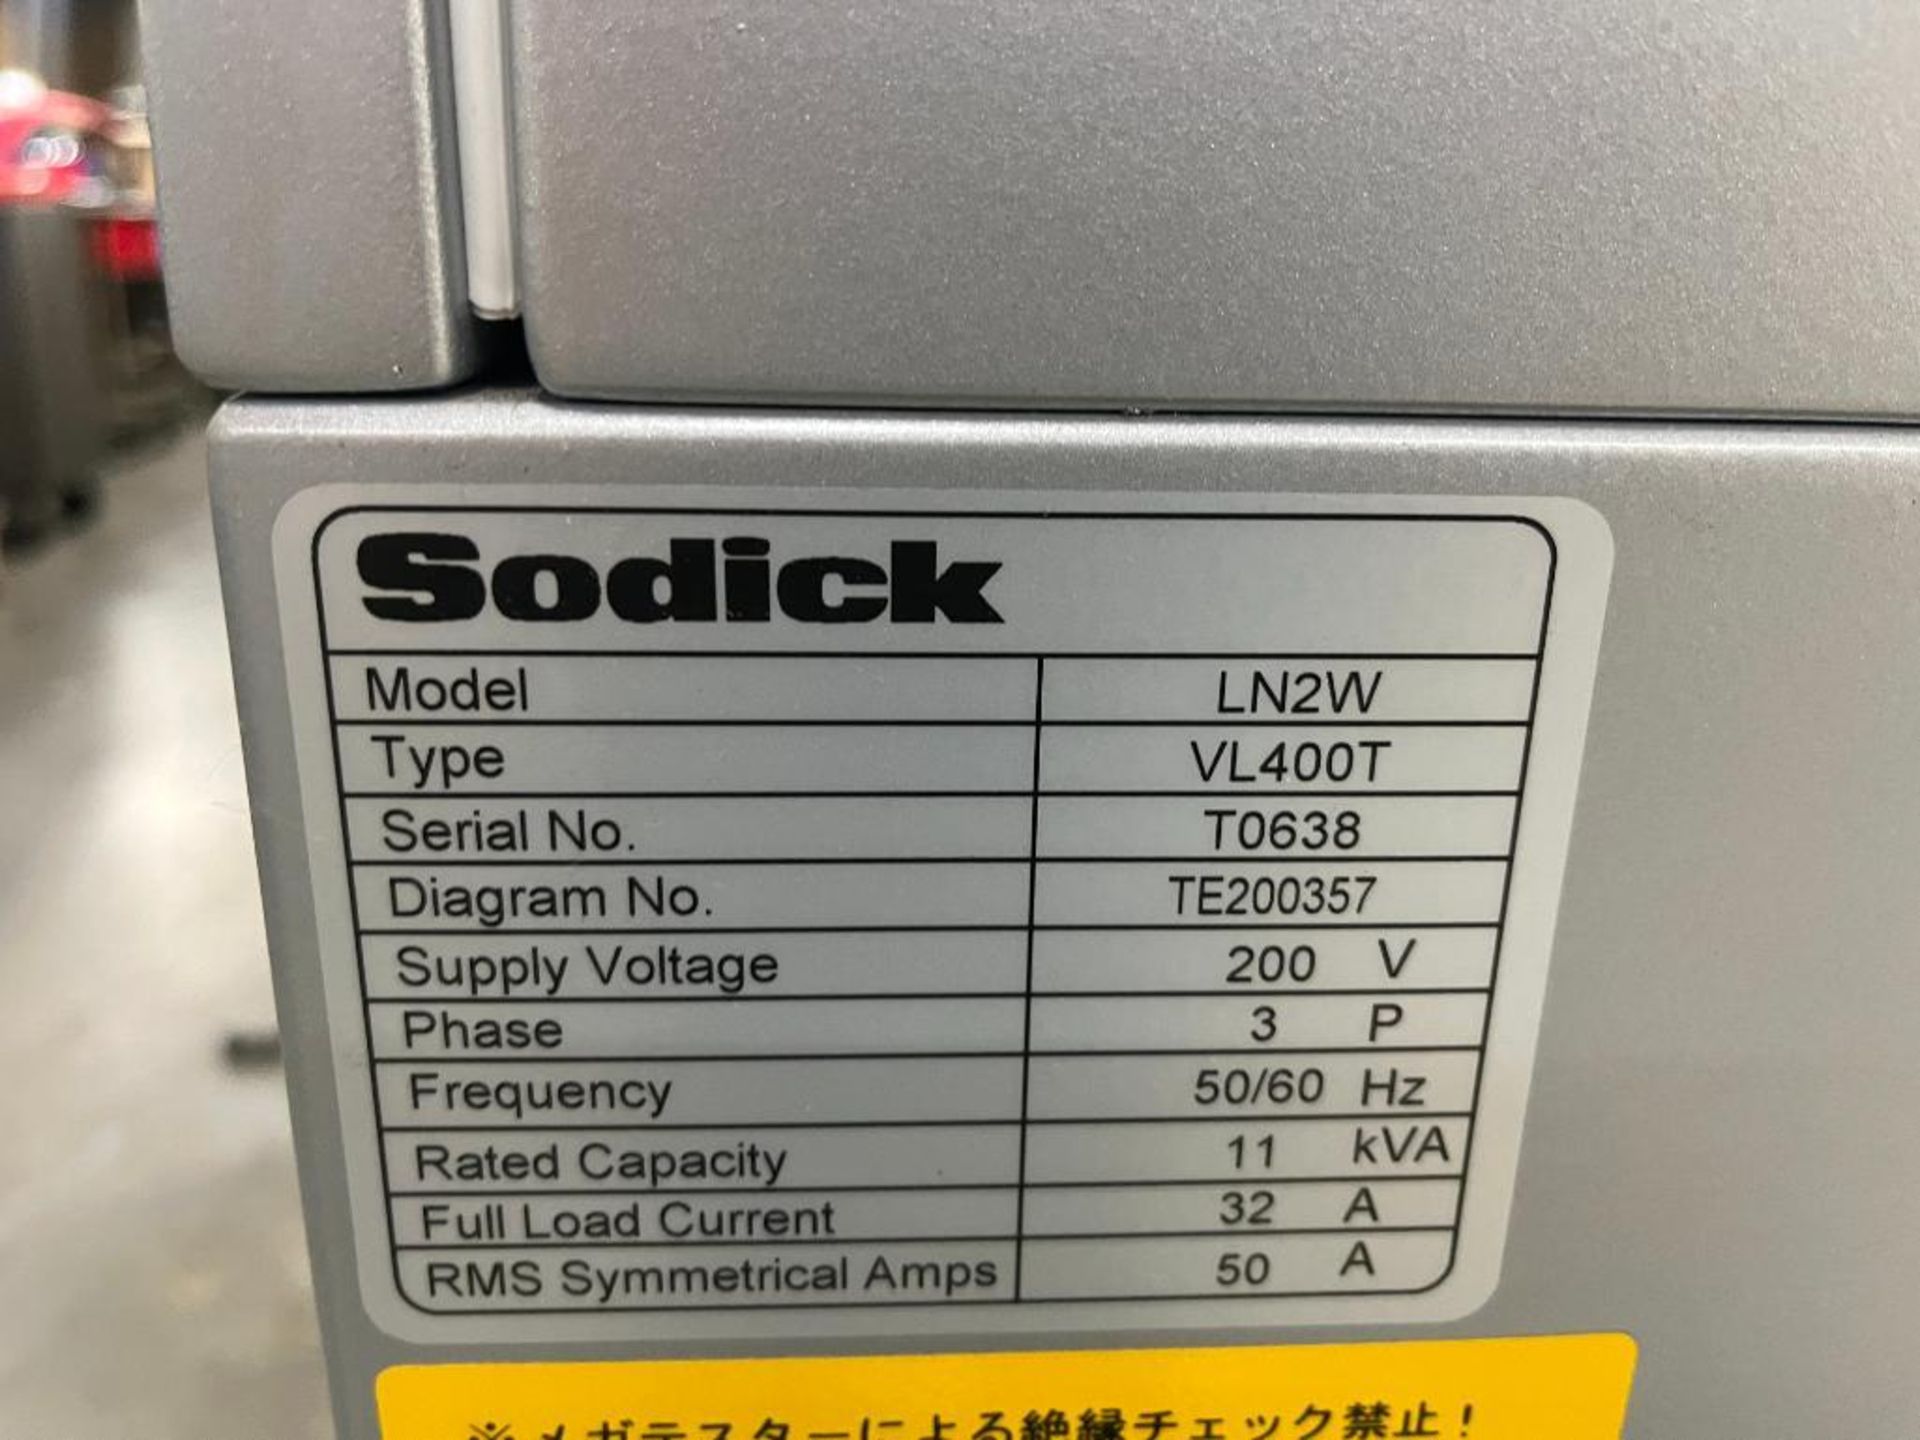 Sodick CNC Wire-Cut EDM Machine, Model VL400Q, S/N T0638 (2019) with Sodick LN2W CNC Control. With 8 - Image 6 of 41